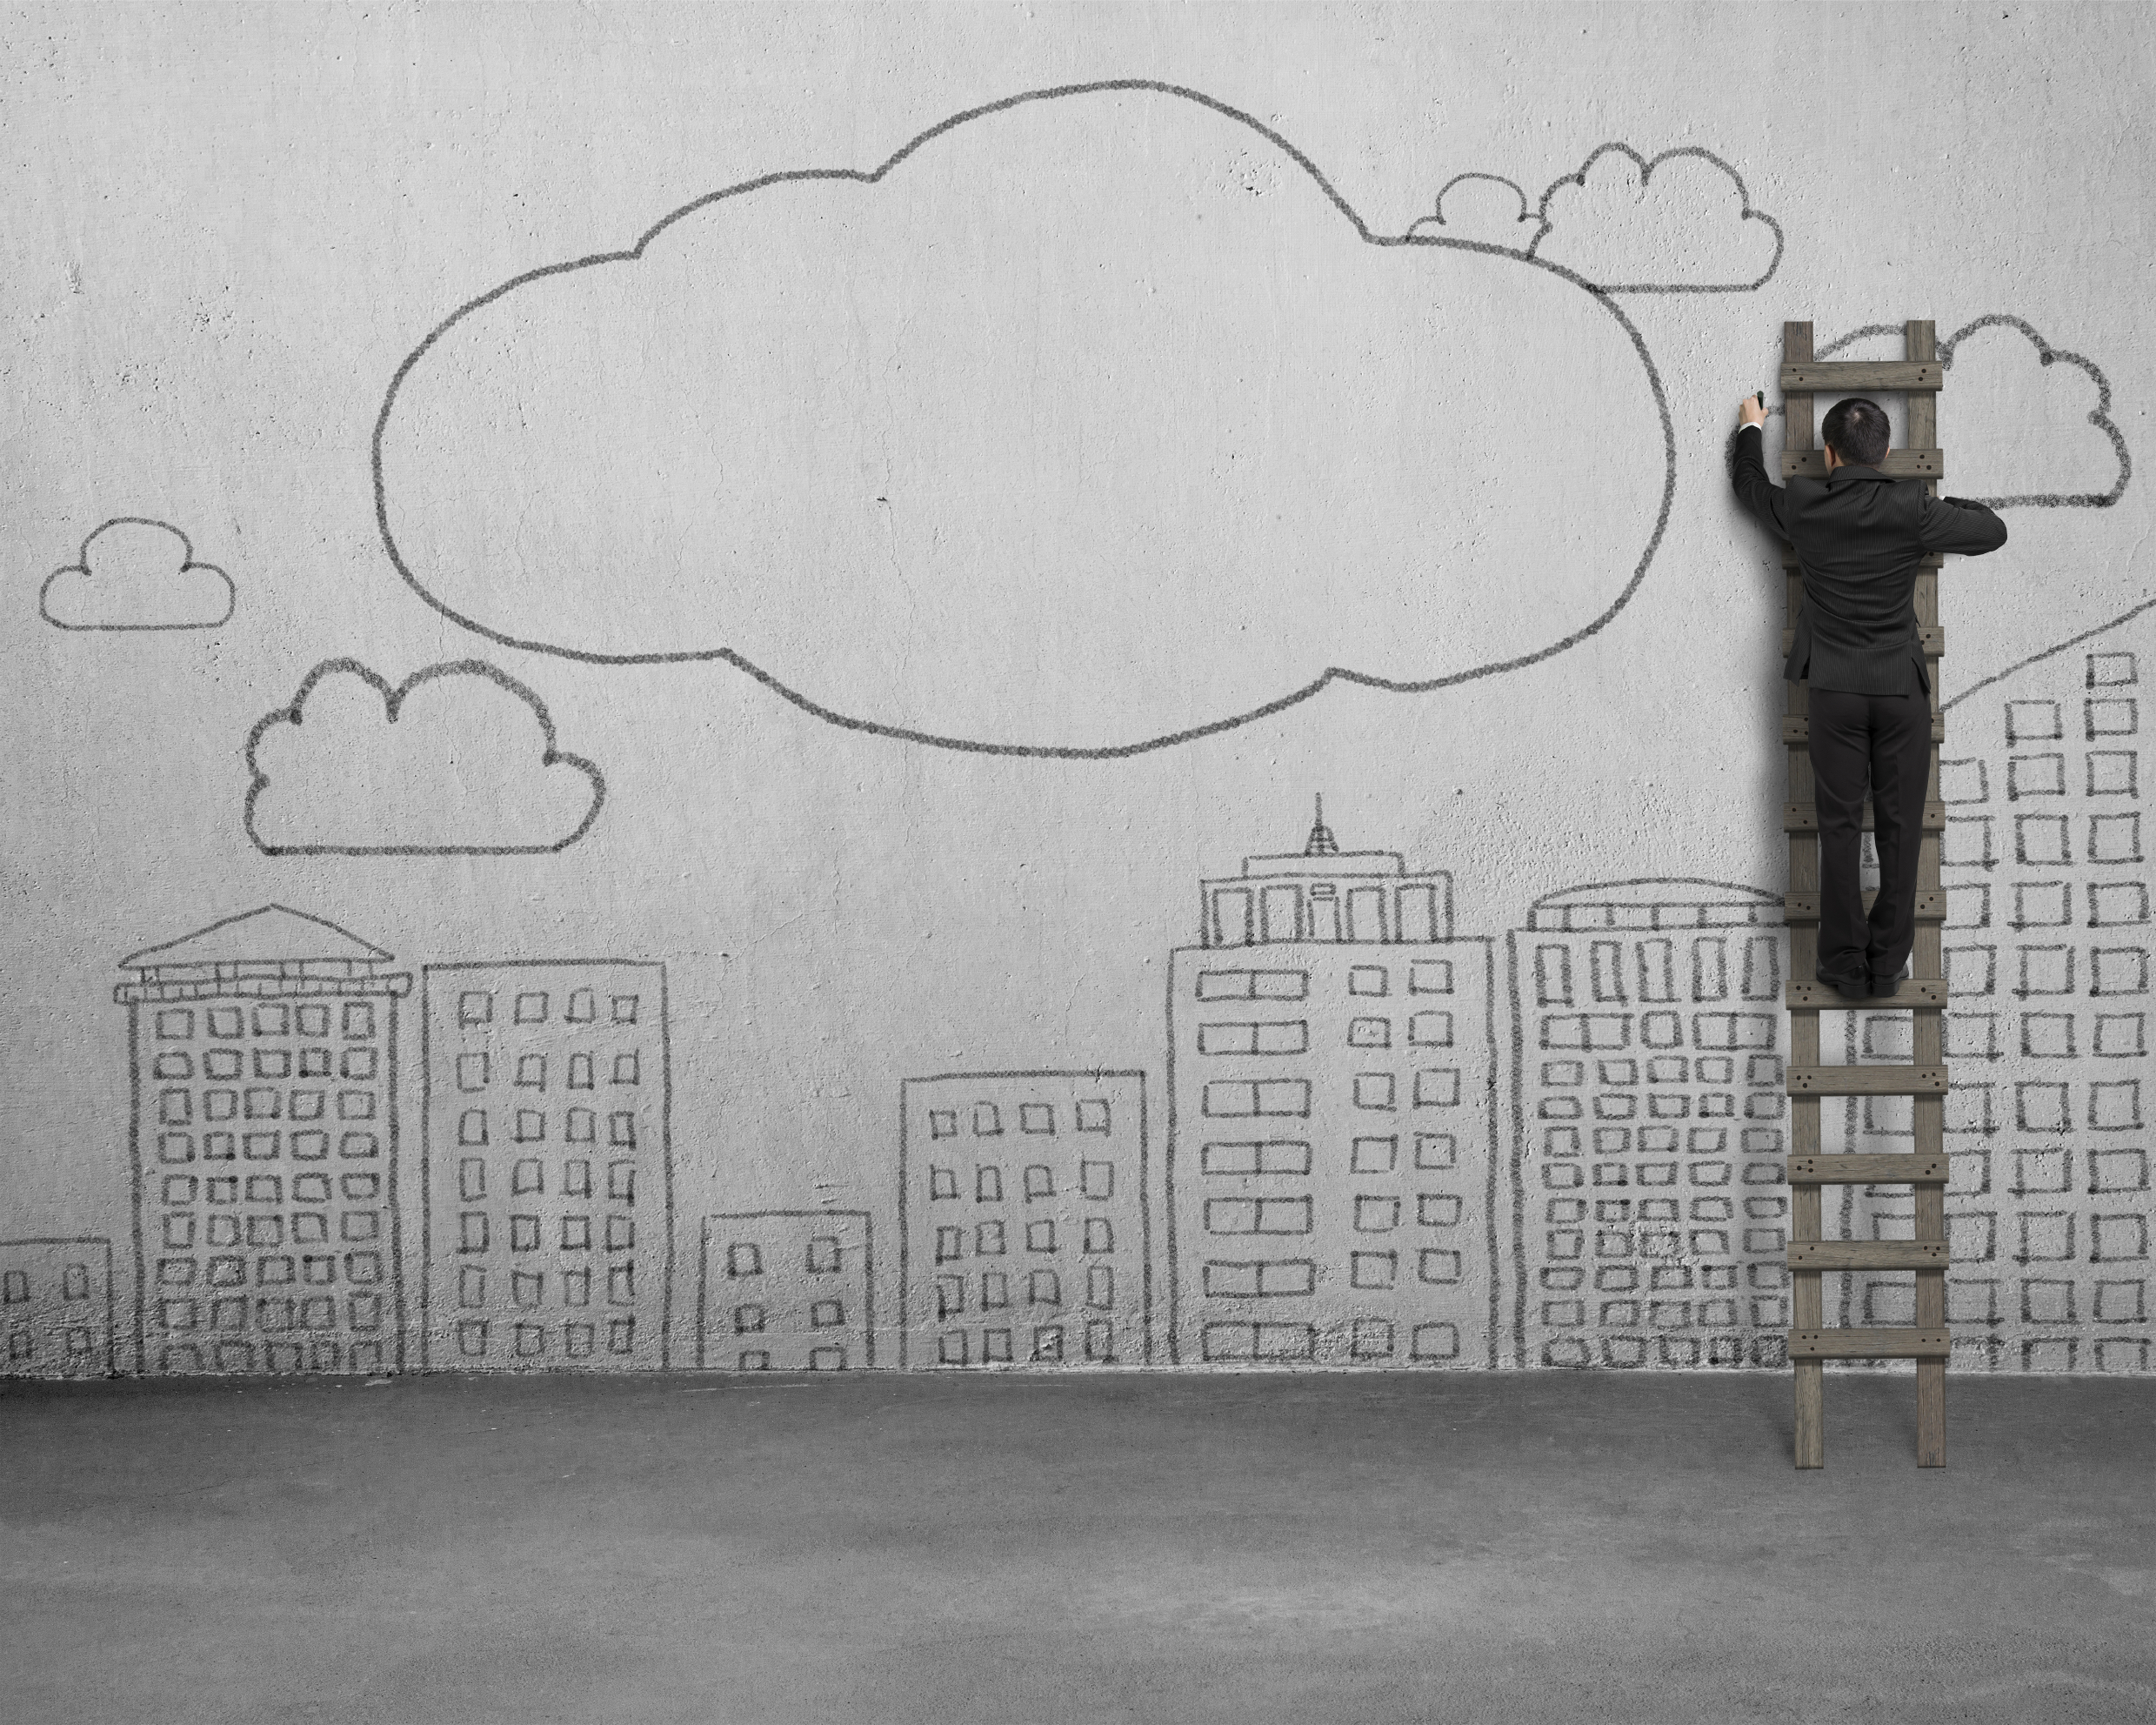 Climbing ladder businessman drawing clouds with copy space and city buildings doodles on concrete wall.